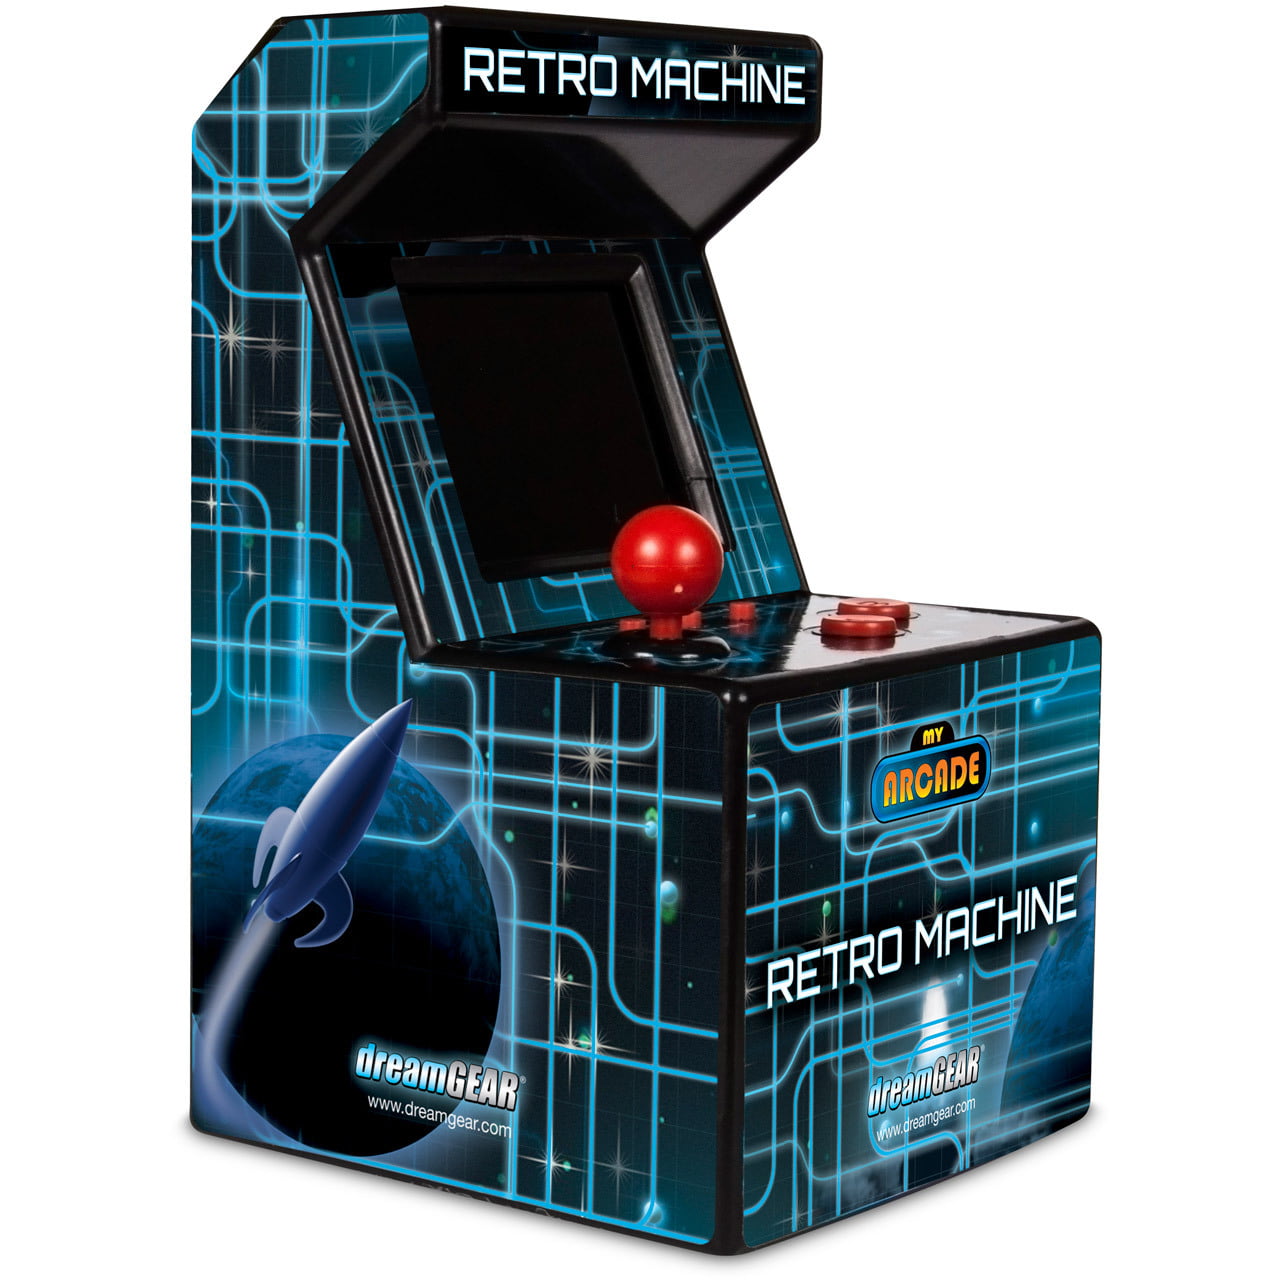 Retro 156 Classic Arcade Games Rechargeable FC Games Consoles 2.8 Inches Electronic Game Player Black Support AV Output Best Video Game Presents E-WOR Kids Mini Arcade Game Machine